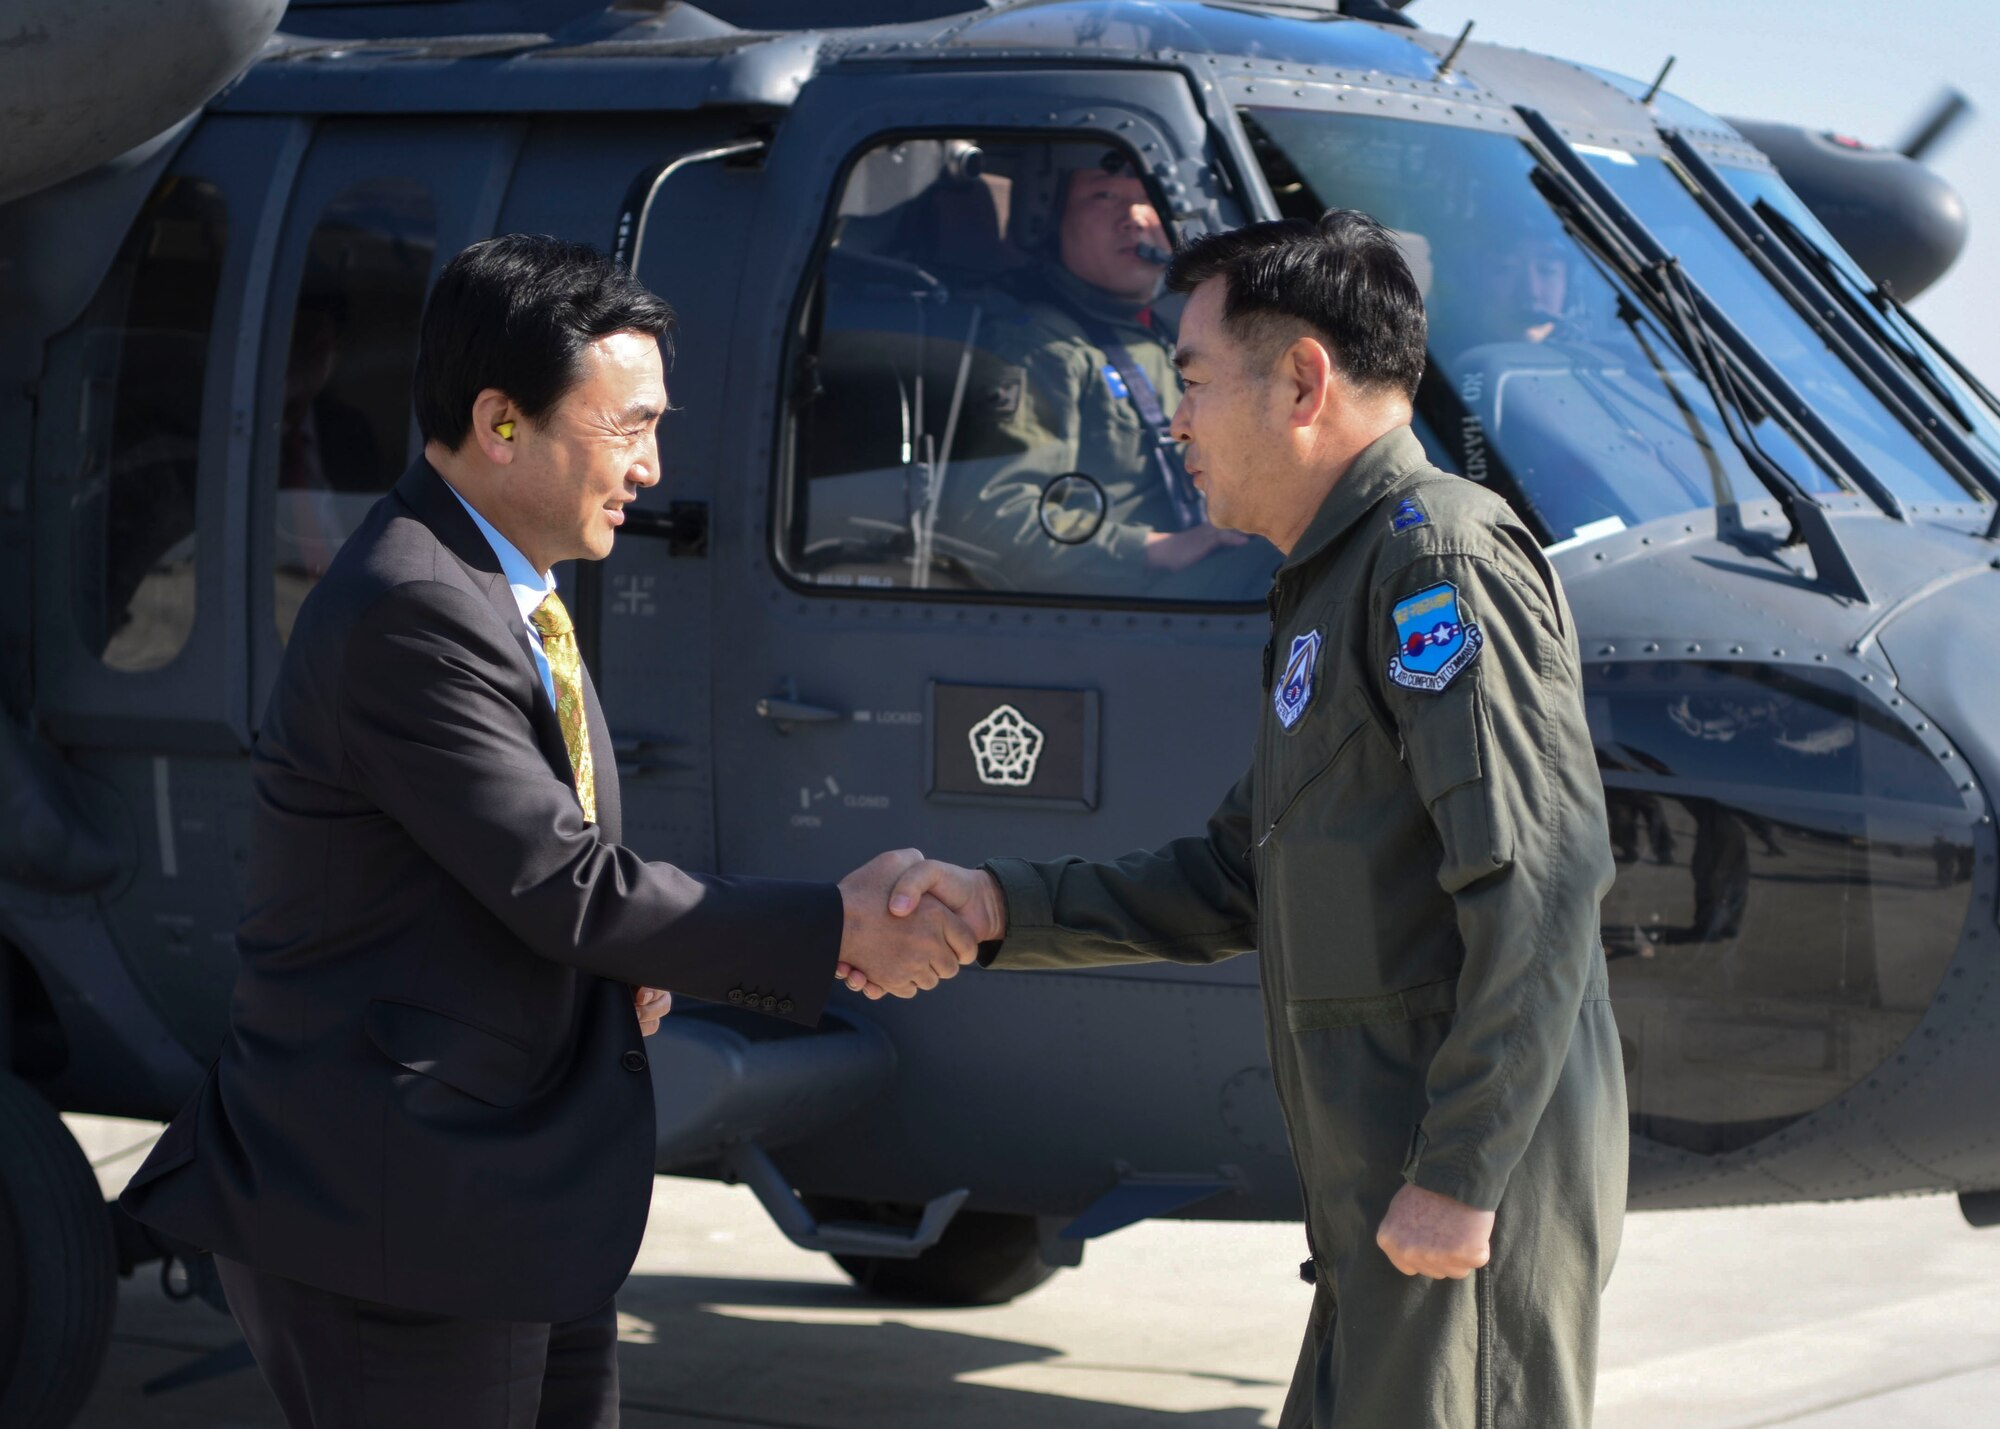 Republic of Korea Air Force Lt. Gen. Lee, Keon Wan, Air Force Operations Command commander, greets Ahn, Gyubaek, National Defense Committee chairman, at Osan Air Base, ROK, Oct. 25, 2018. The NDC conducted an ROK AFOC site inspection and observed flight line operations. (U.S. Air Force photo by Airman 1st Class Ilyana A. Escalona)